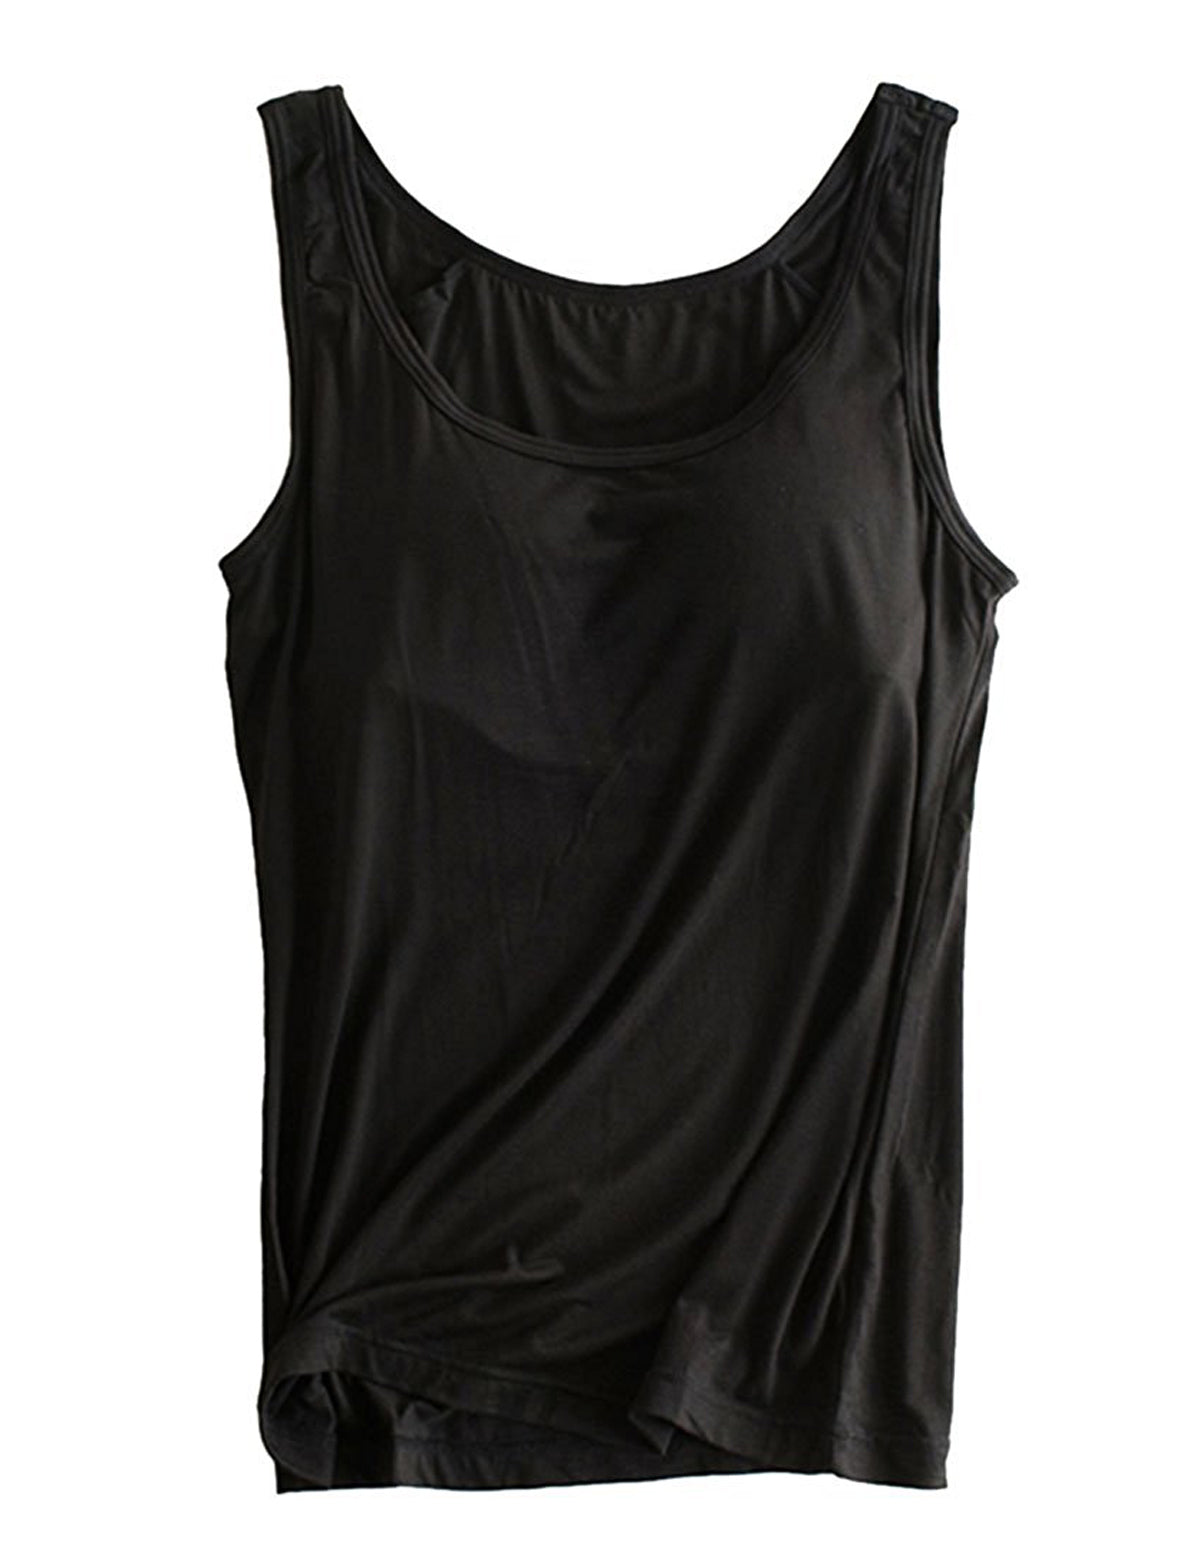 Women's Stretch Camisole Regular Size Tank Tops for Sports and Daily, 1205-02